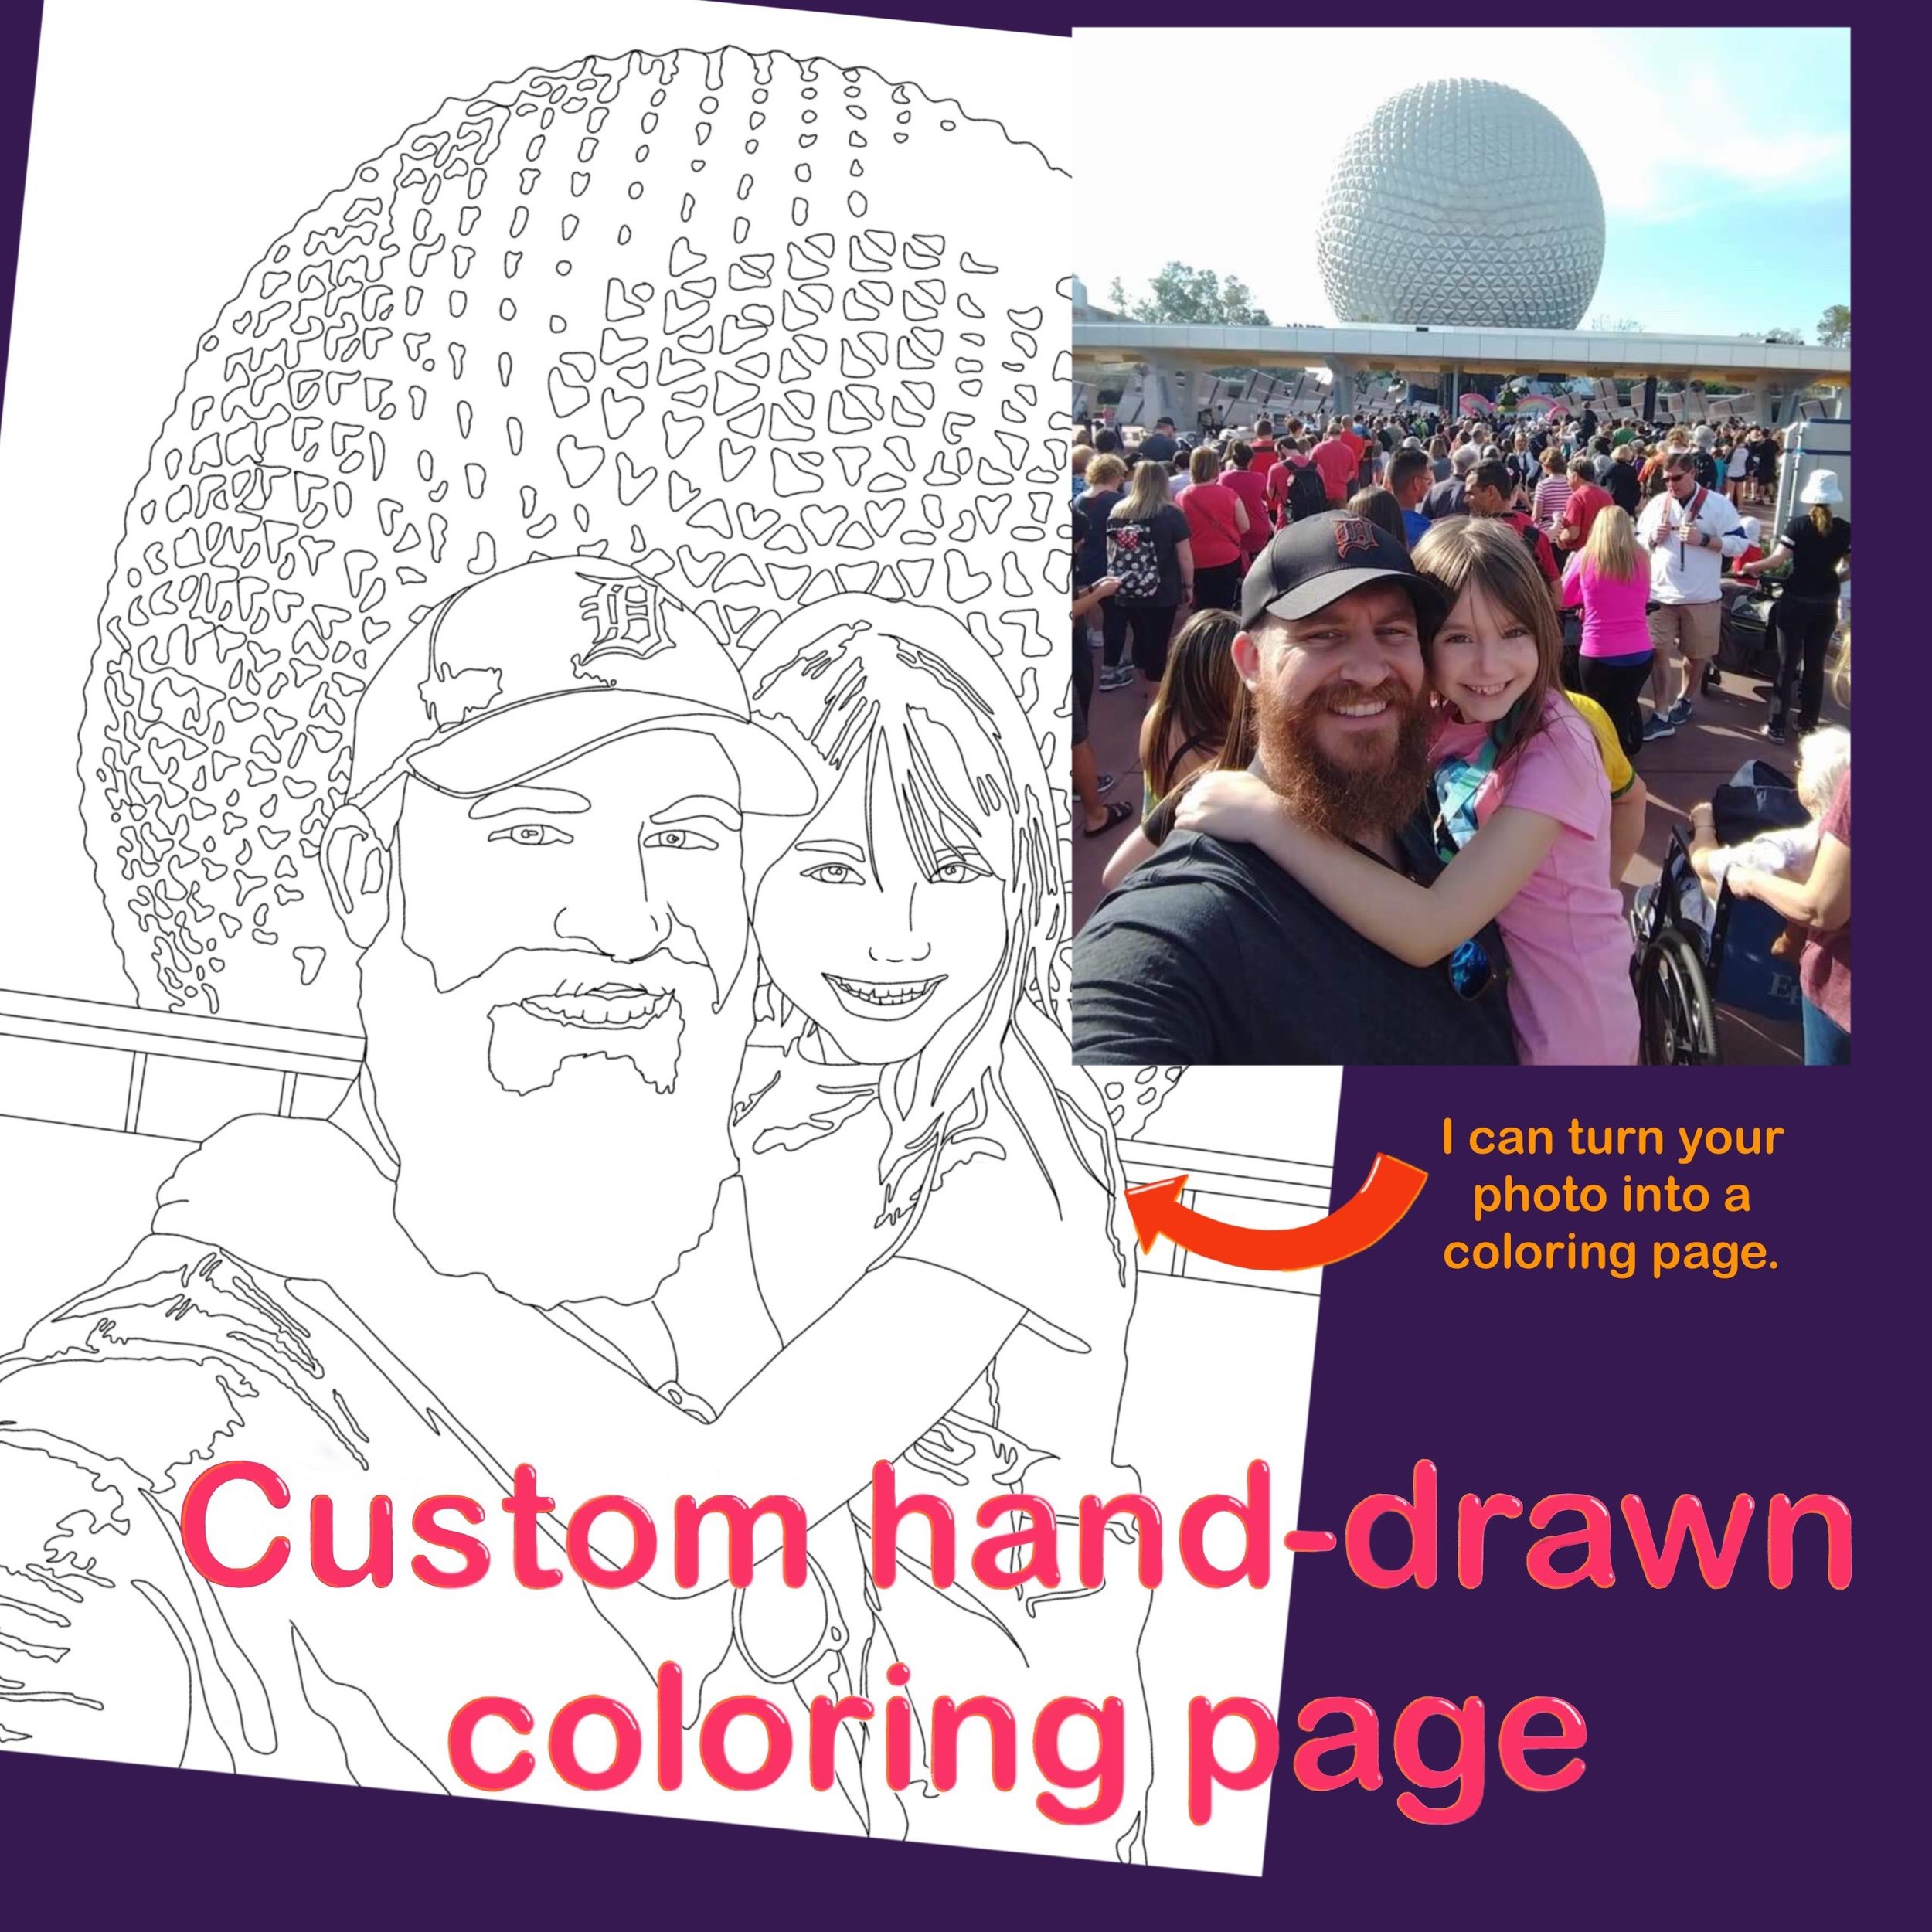   Custom hand-drawn  coloring pages available now!  